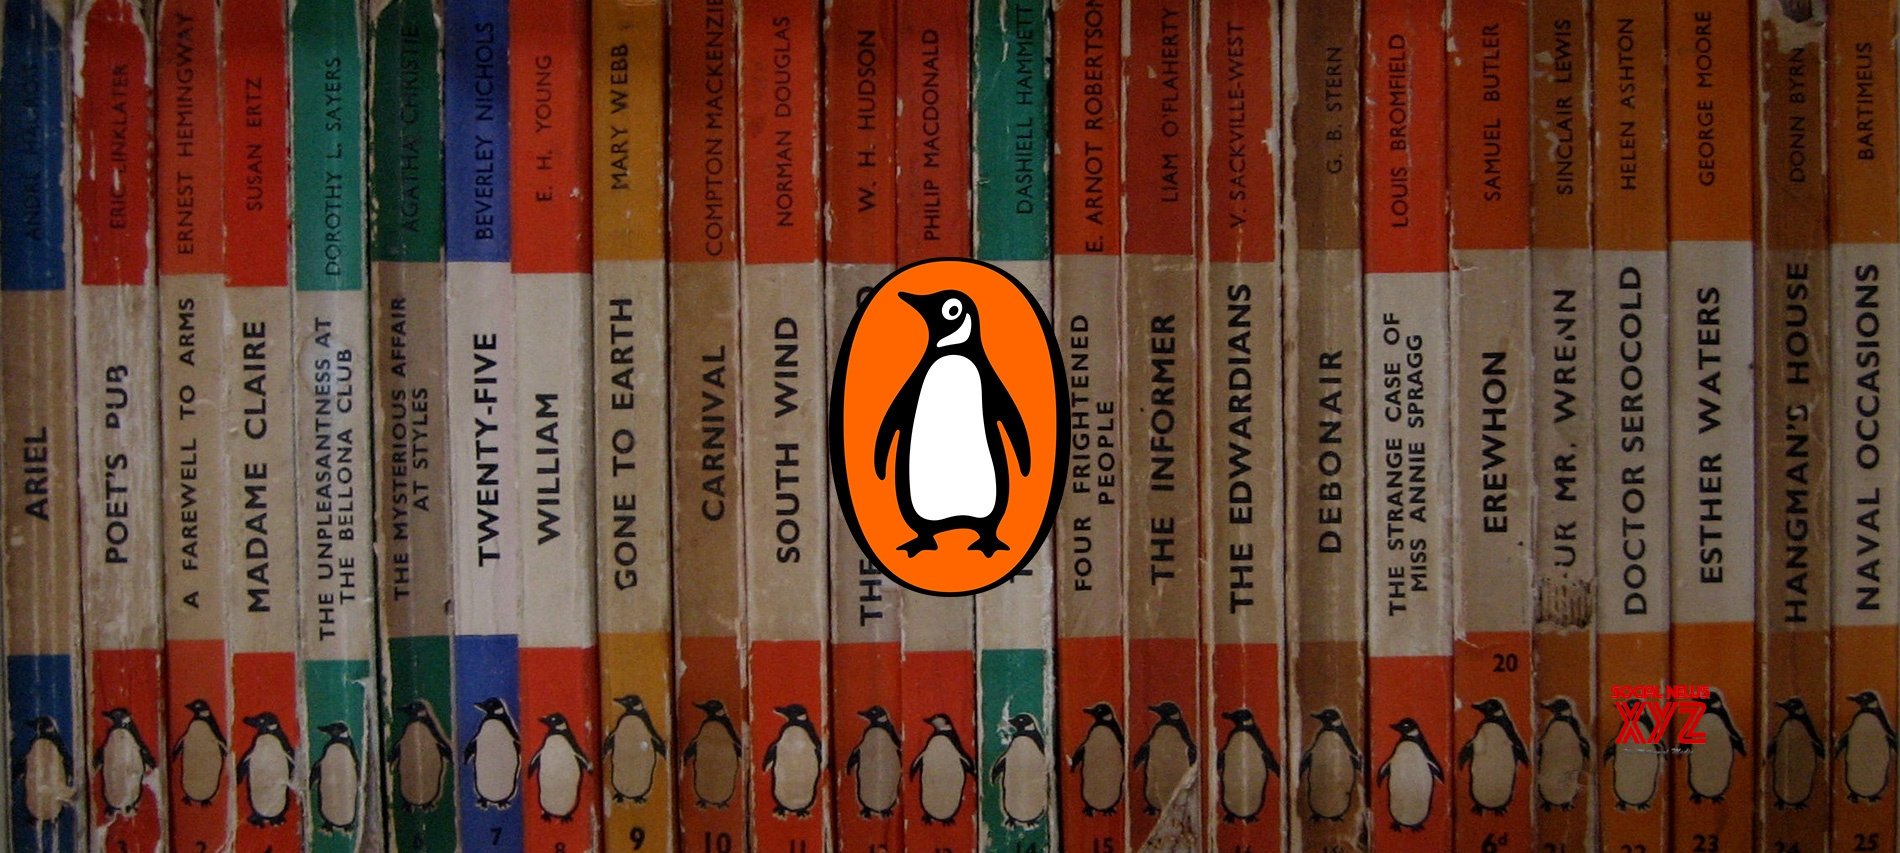 Duckbill brand will be published within Penguin Random House India